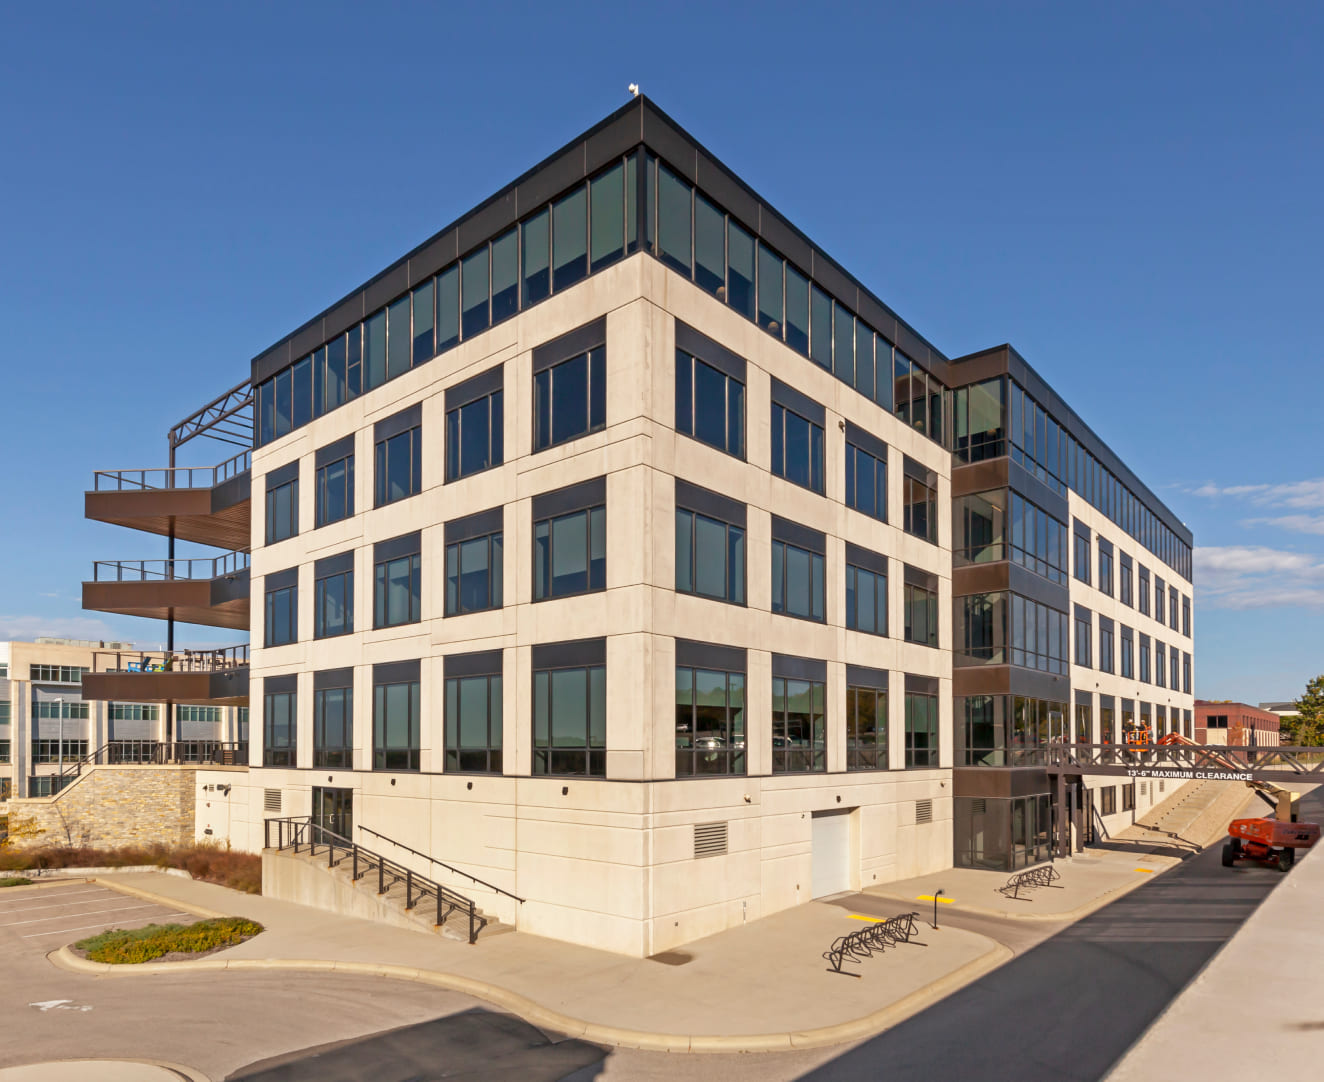 Another view of the exterior and balconies of the office building at 2323 Crossroads Drive in Madison, WI.